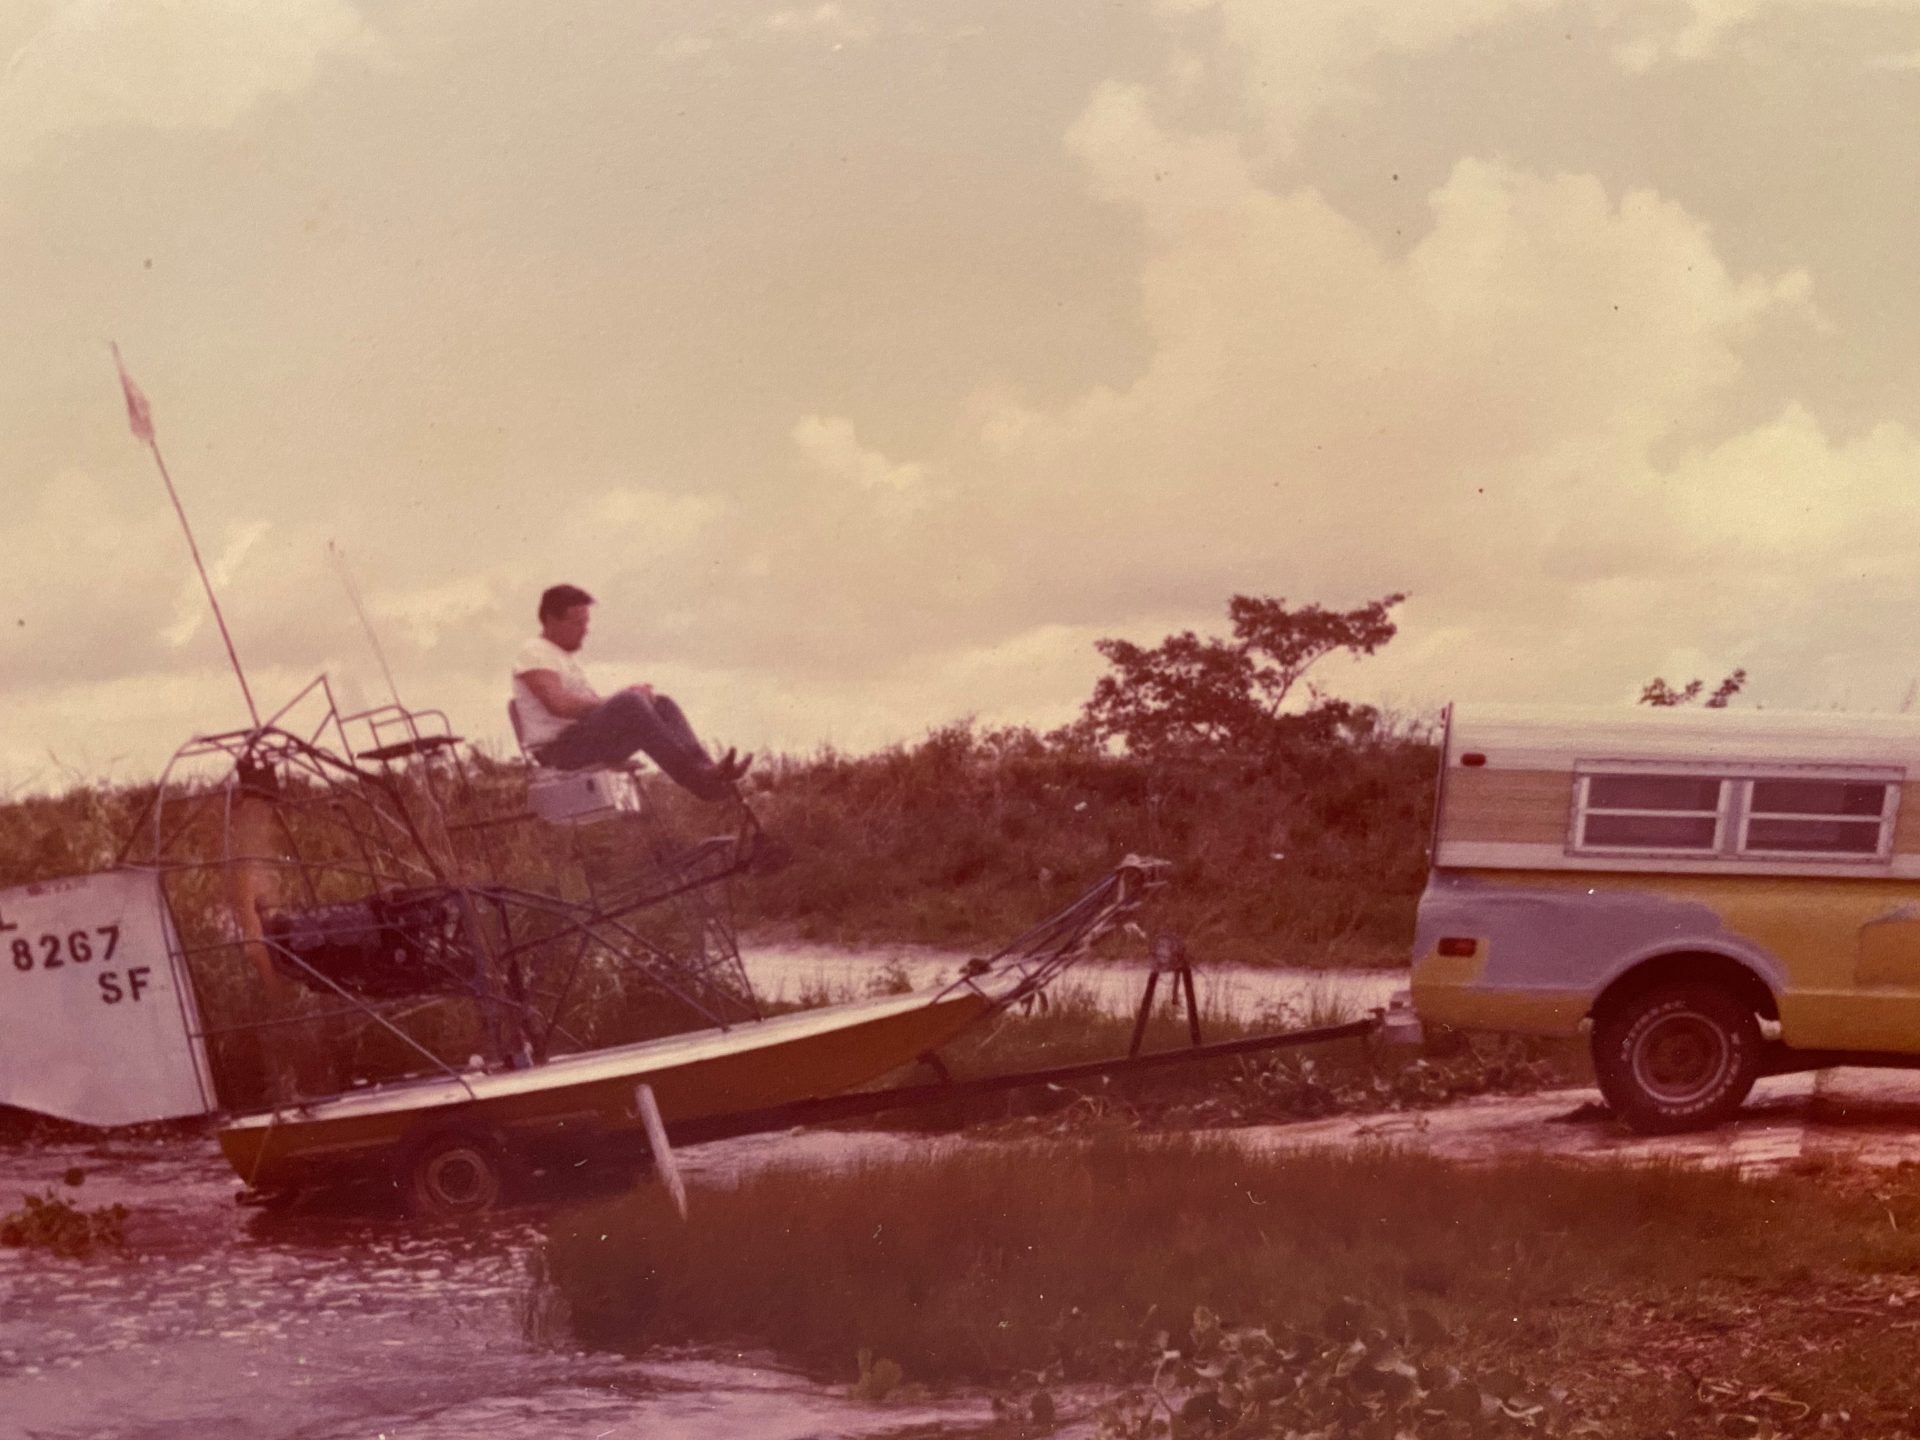 Bobby loading yellow airboat on the trailer